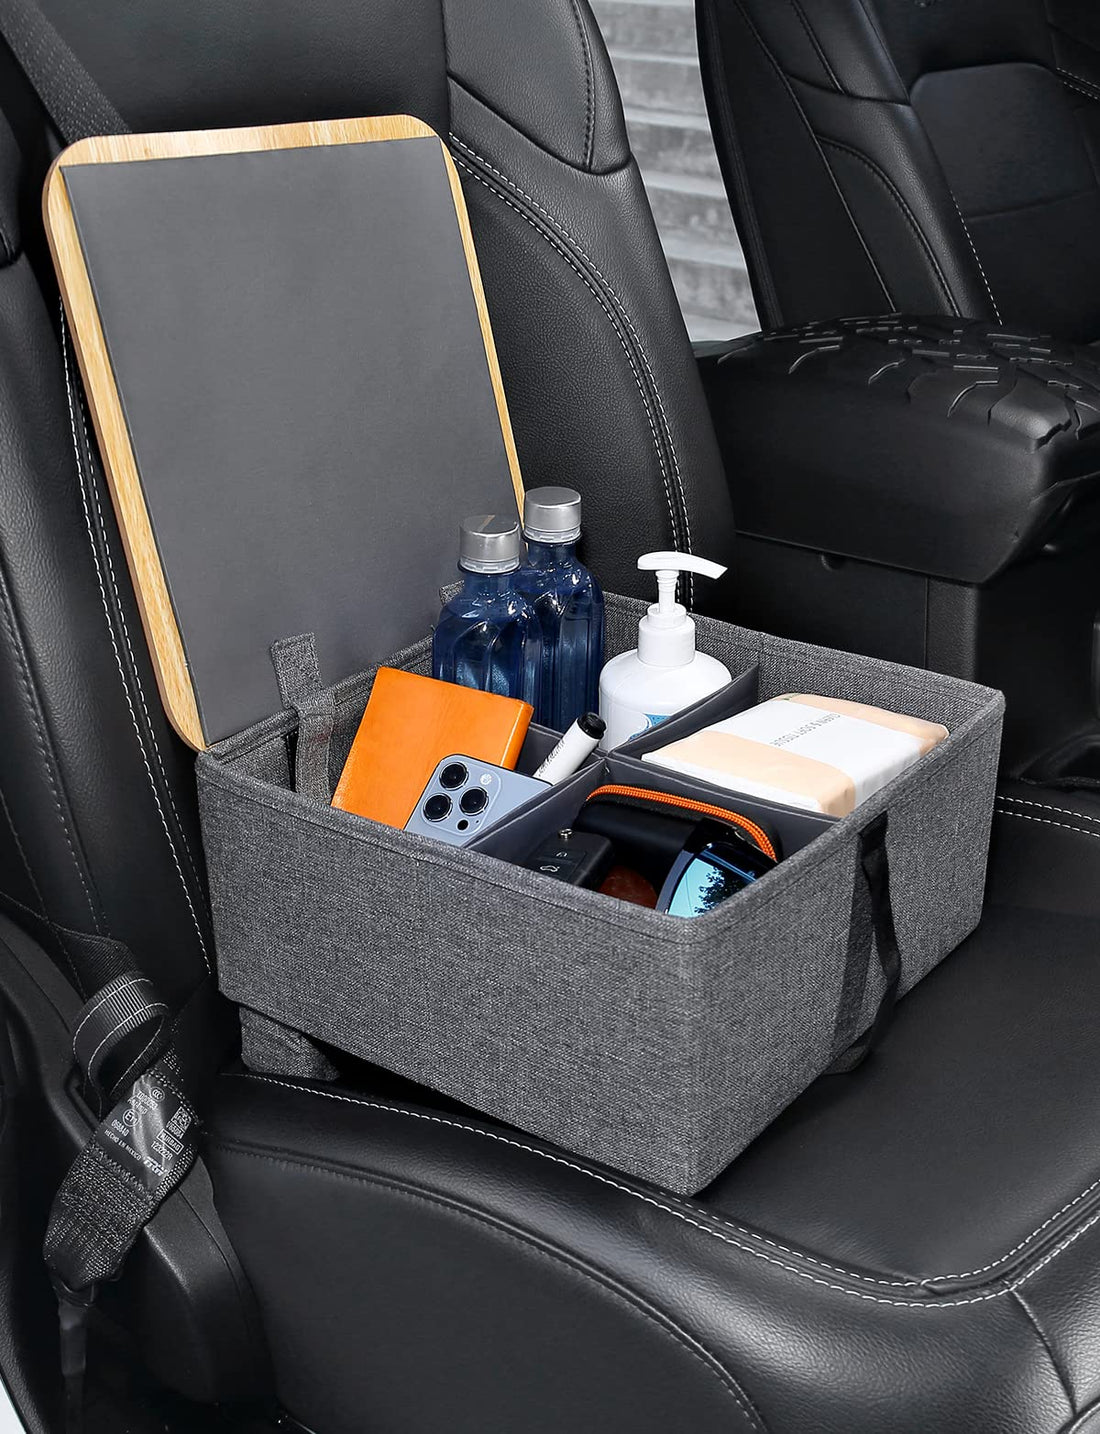 Car Seat Organizer, Stable Car Storage Organizer with Detachable Bamboo Cover, 4 Adjustable Dividers and Fastening Belt